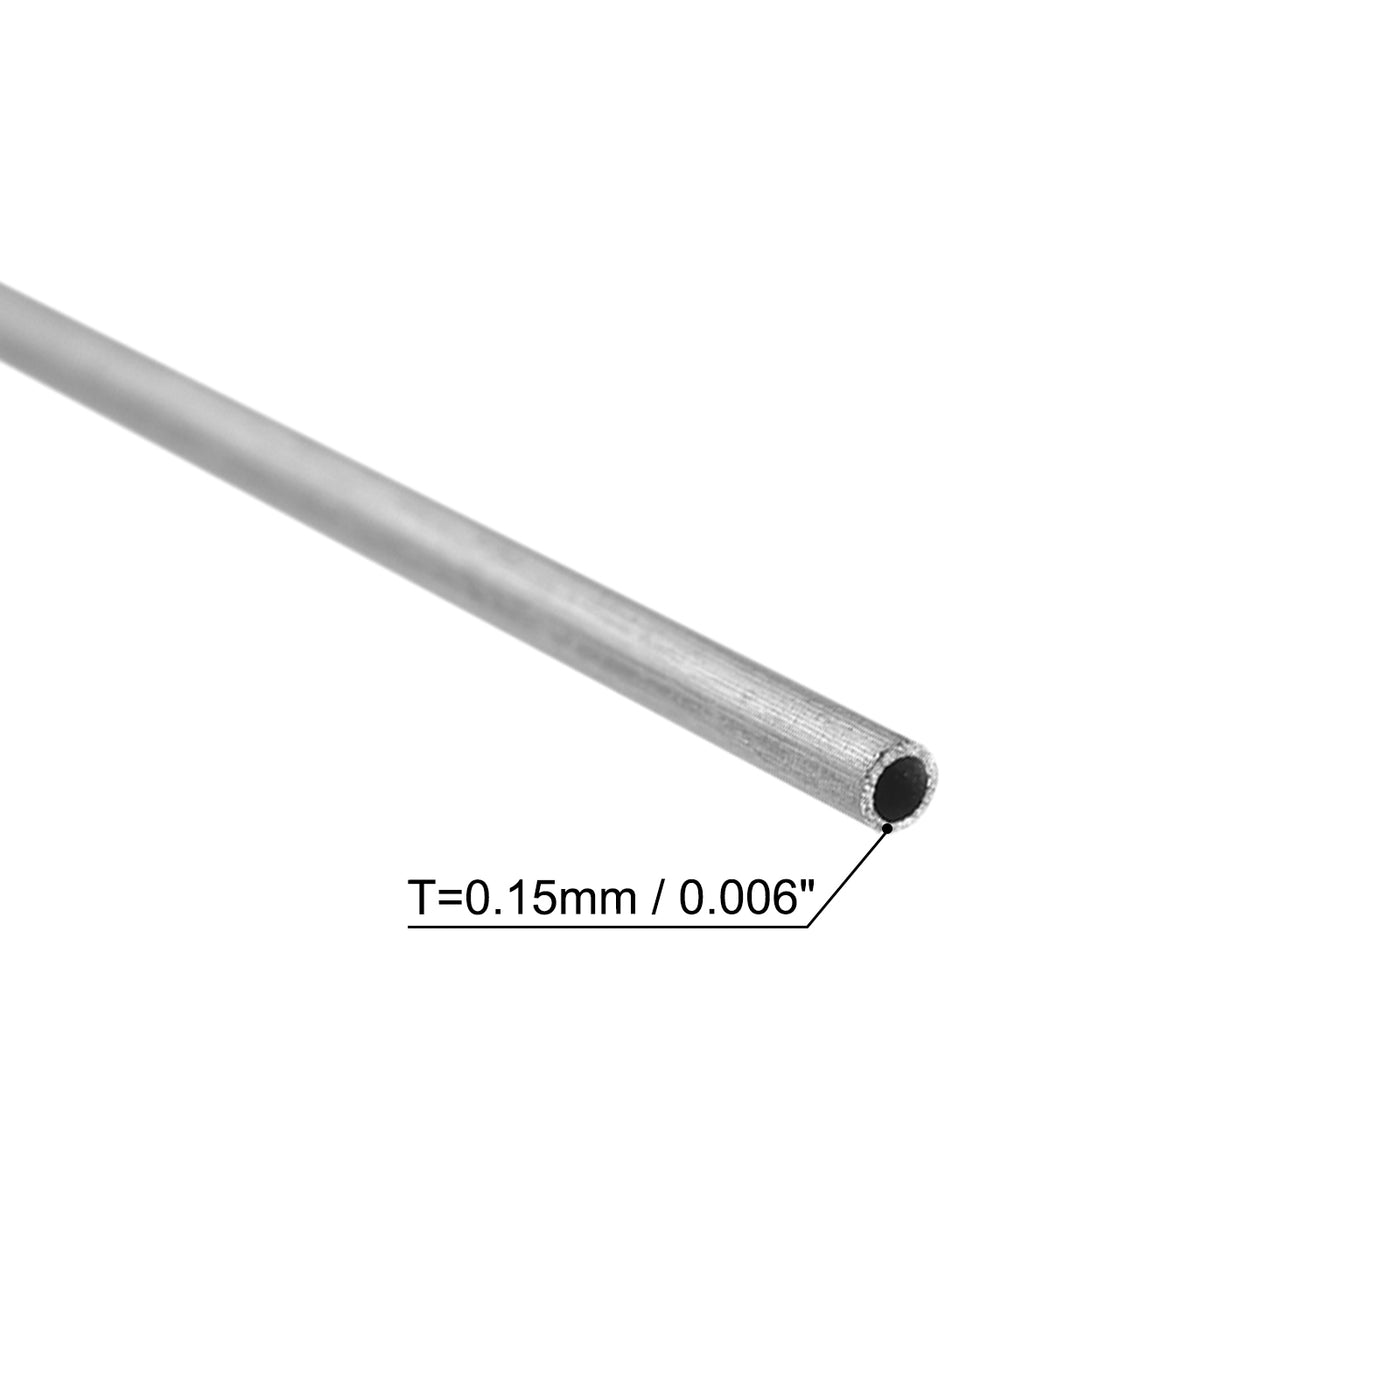 Uxcell Uxcell 304 Stainless Steel Round Tube 1mm OD 0.15mm Wall Thickness 300mm Length 5 Pcs